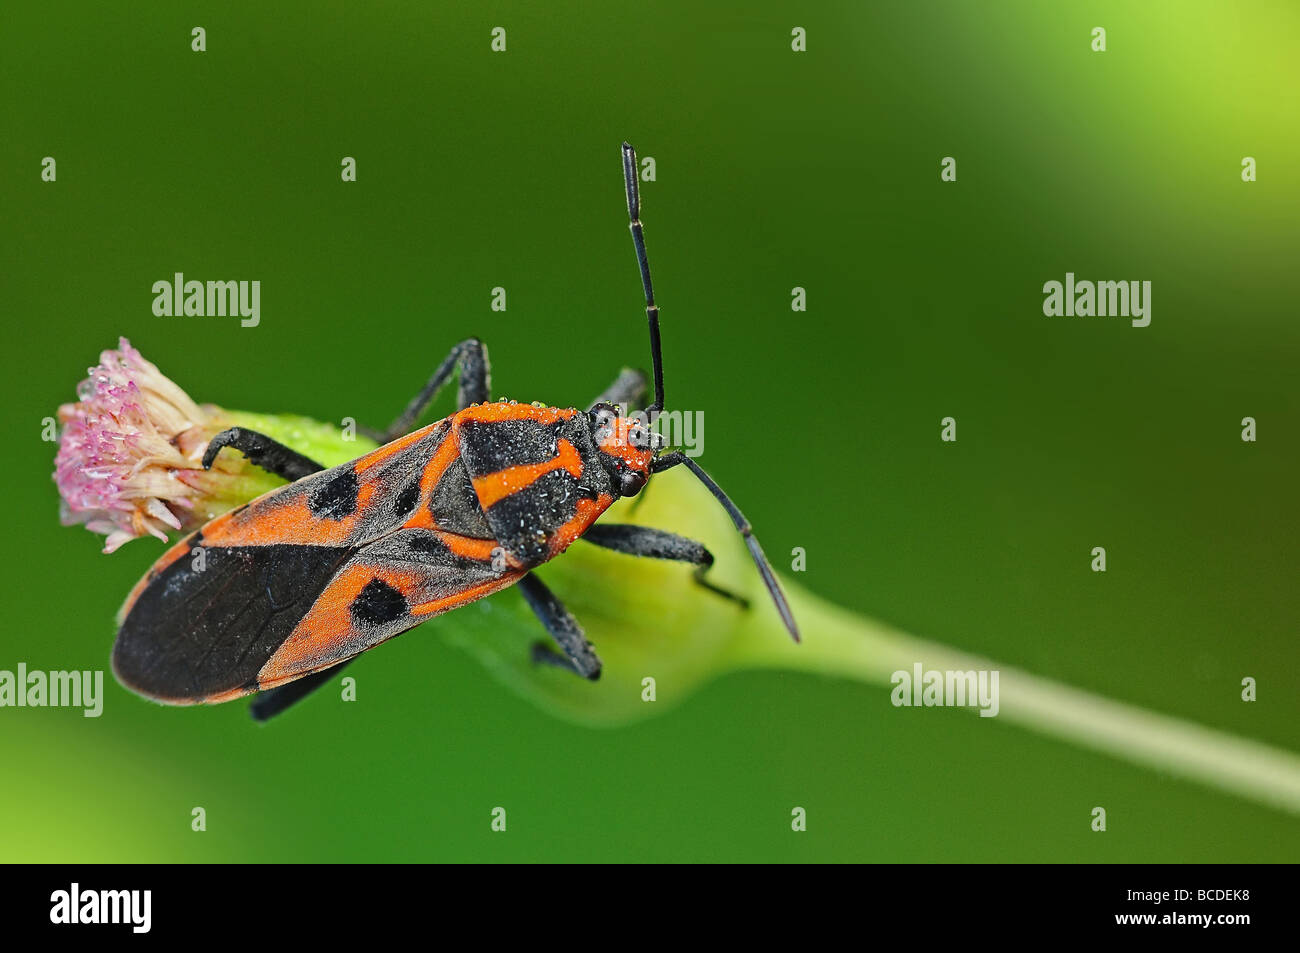 stink bug in the parks Stock Photo